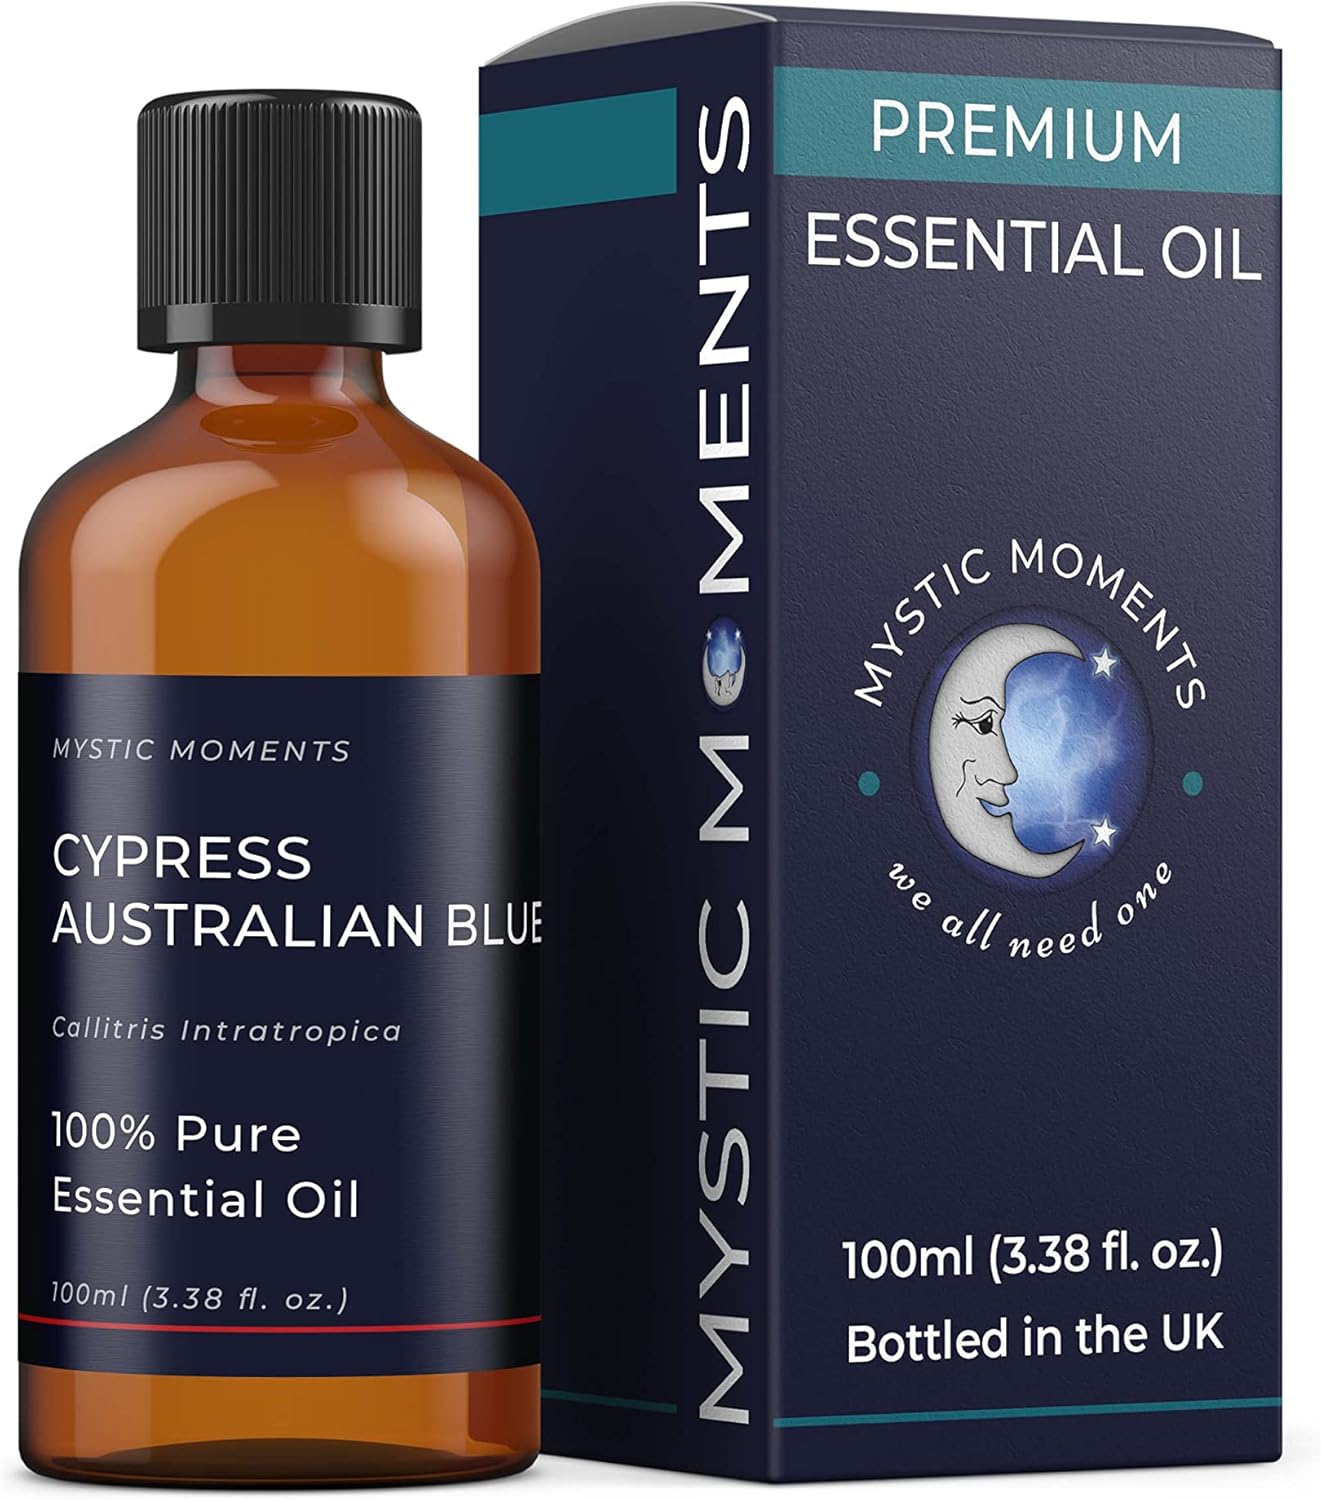 Mystic Moments | Cypress Australian Blue Essential Oil 100ml - Pure & Natural Oil for Diffusers, Aromatherapy & Massage Blends Vegan GMO Free